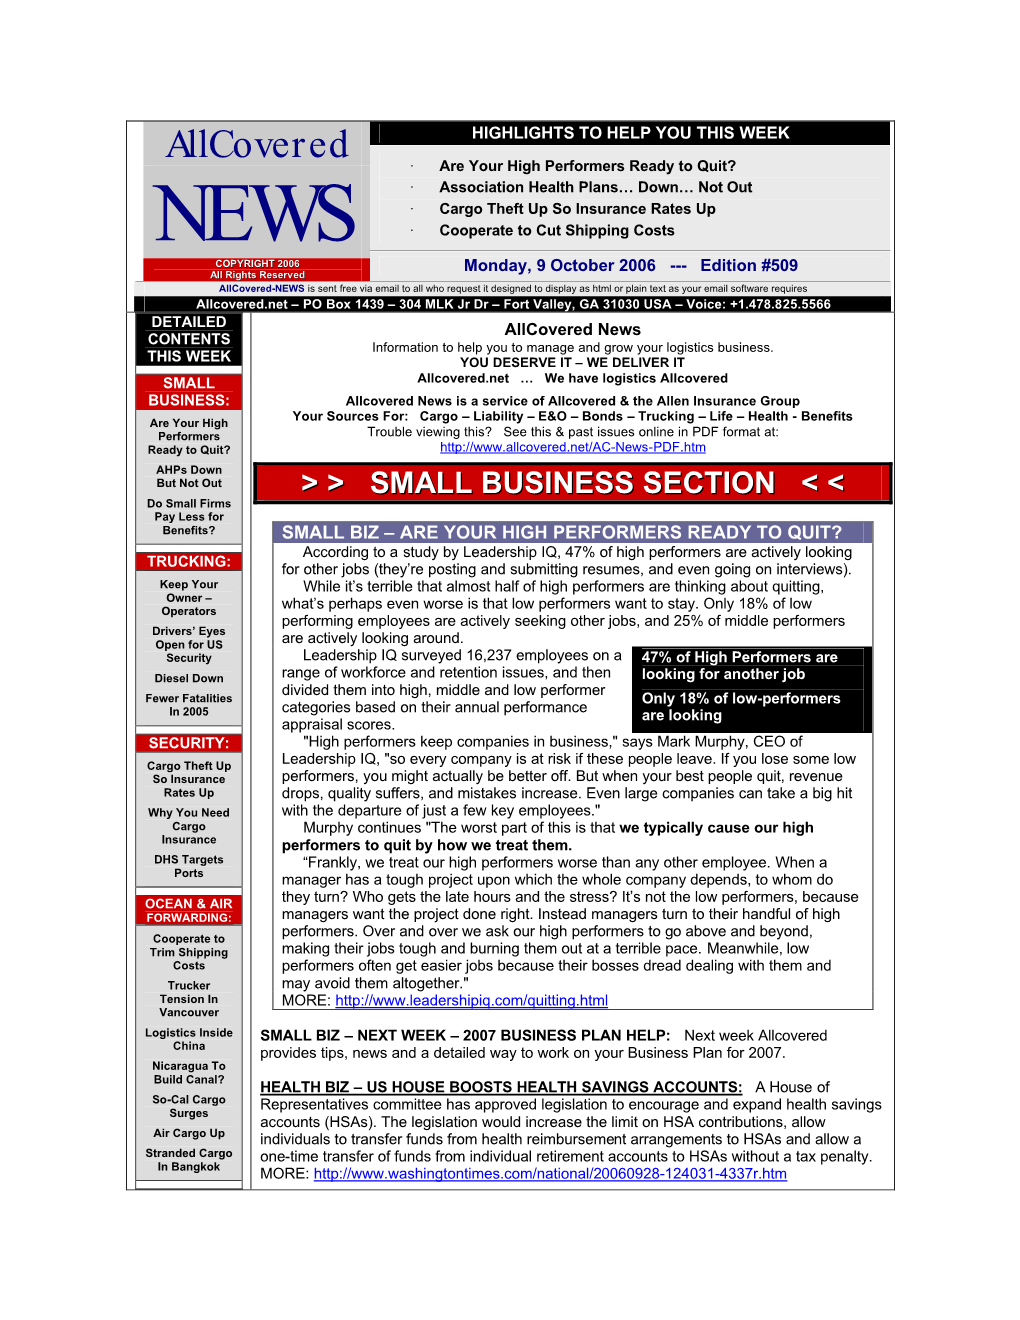 Allcovered News CONTENTS Information to Help You to Manage and Grow Your Logistics Business